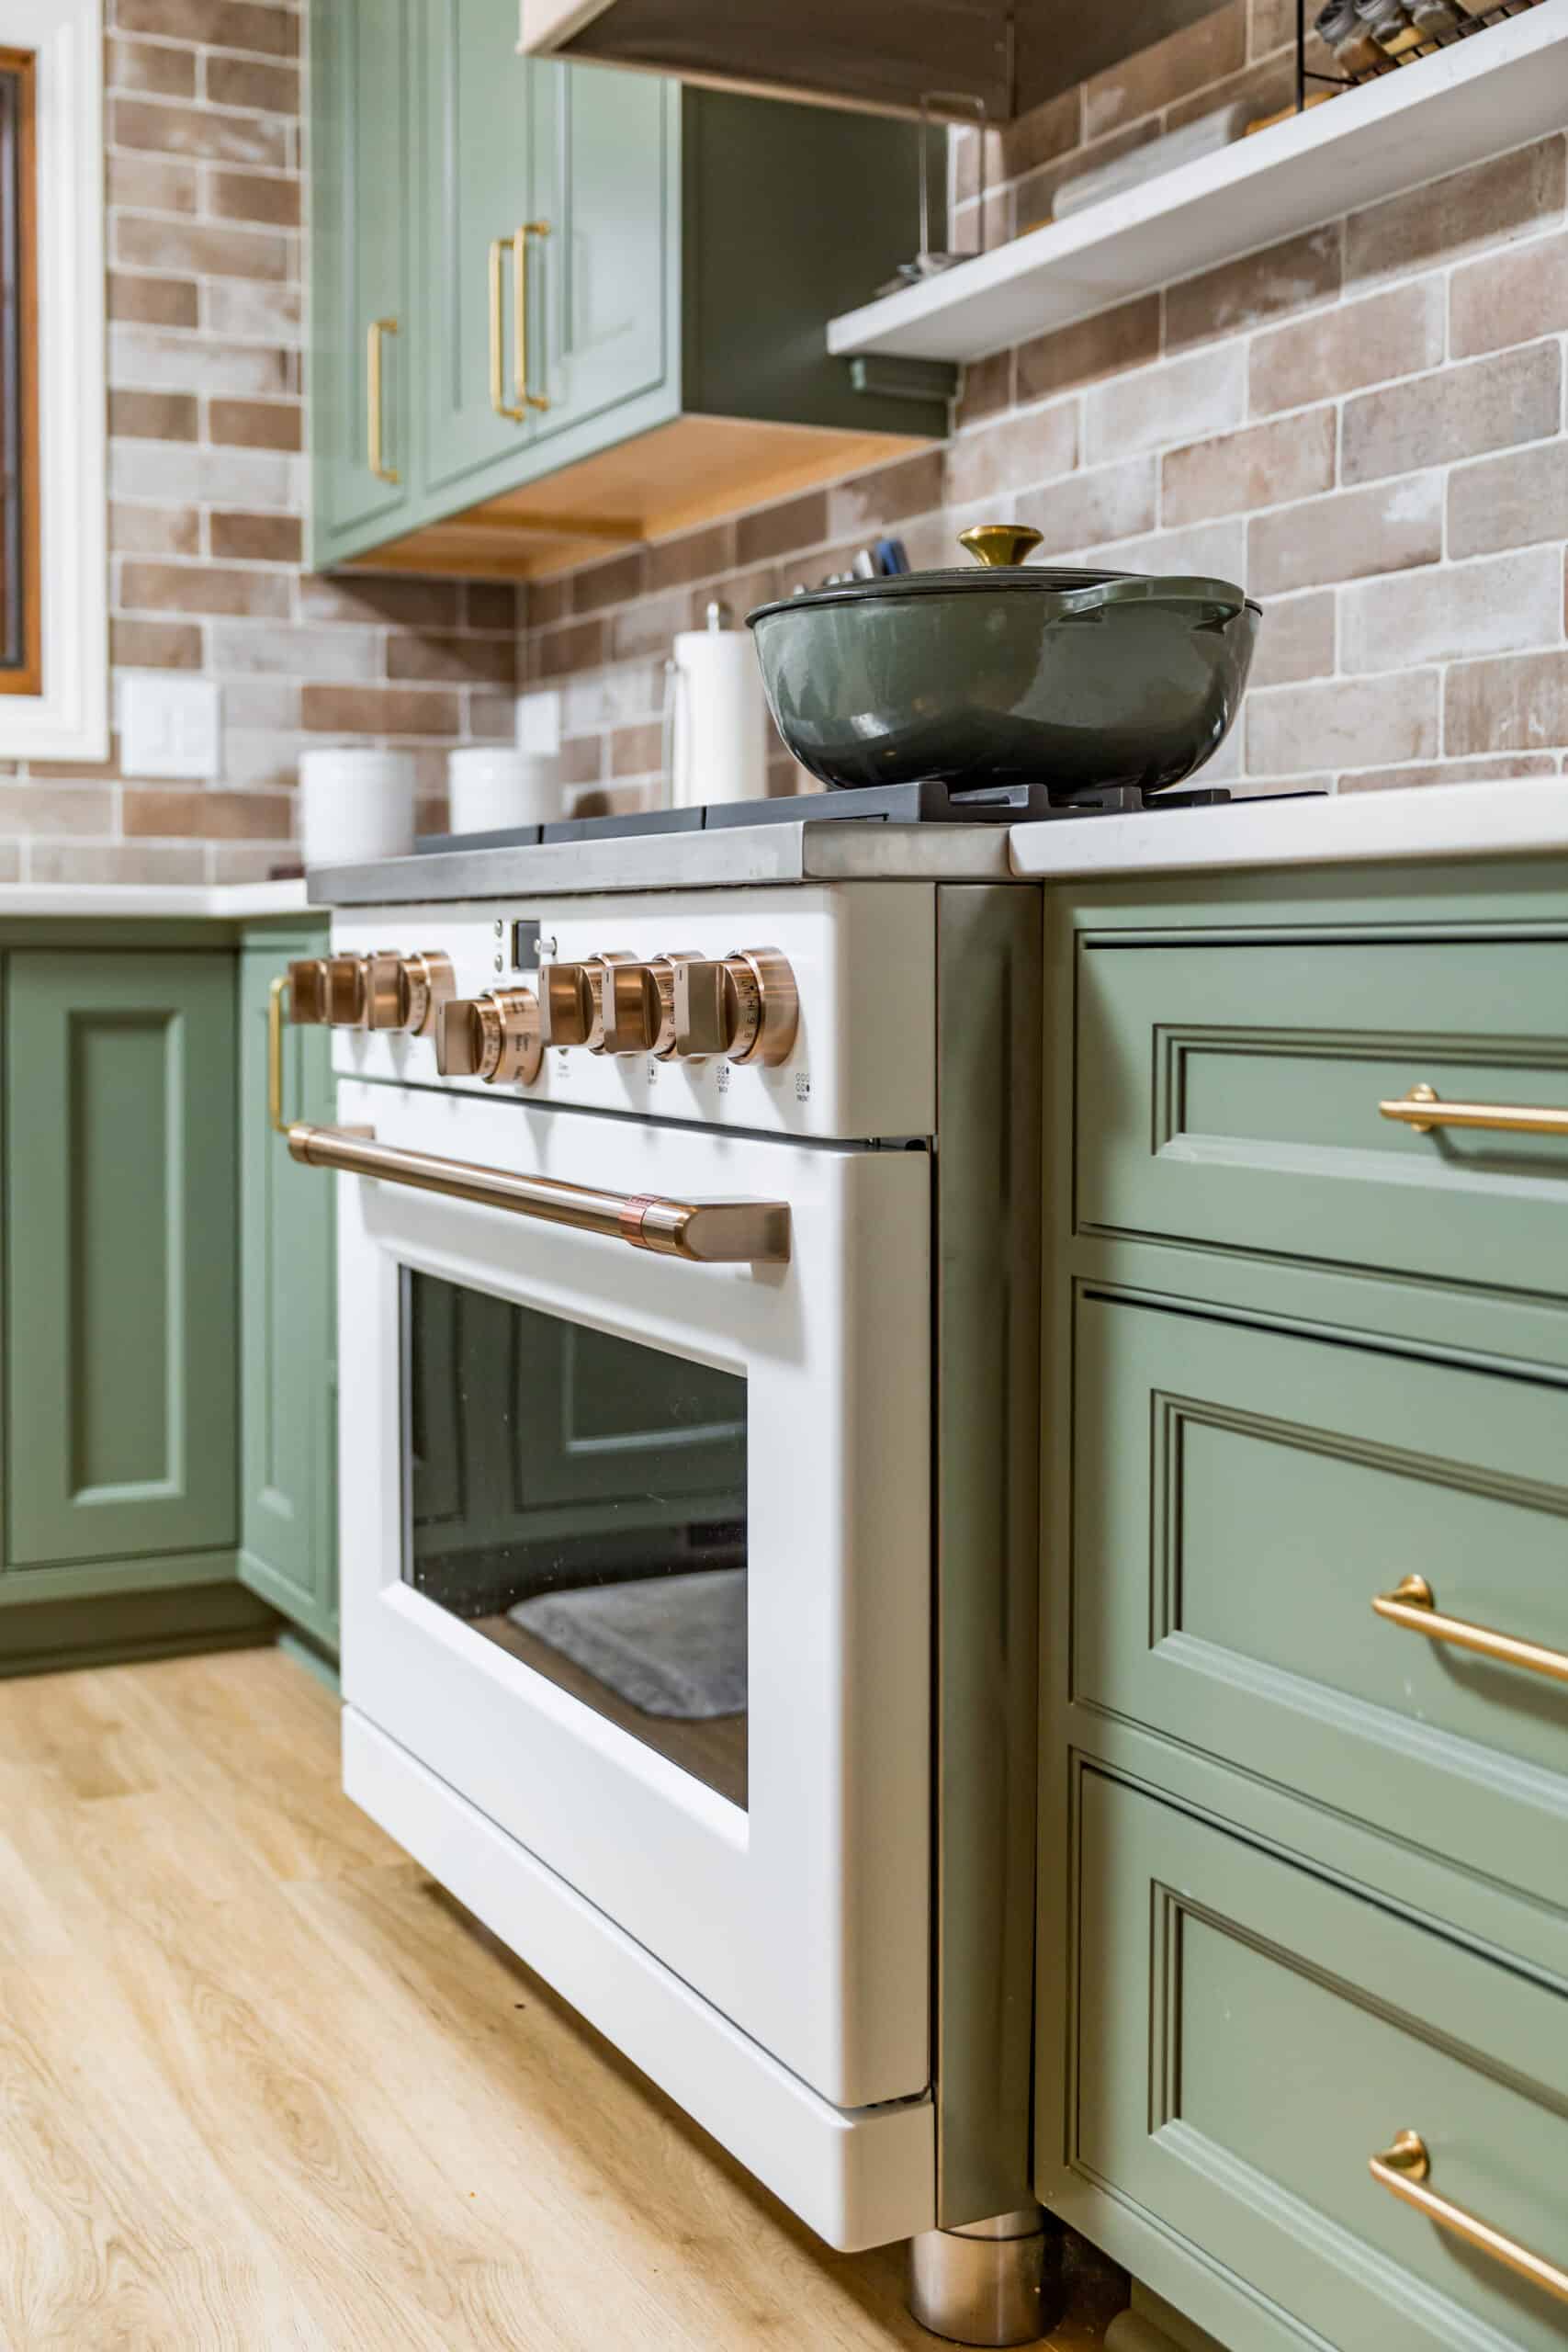 Nicholas Design Build | Modern kitchen with green cabinetry and a stainless steel stove with a frying pan on top.